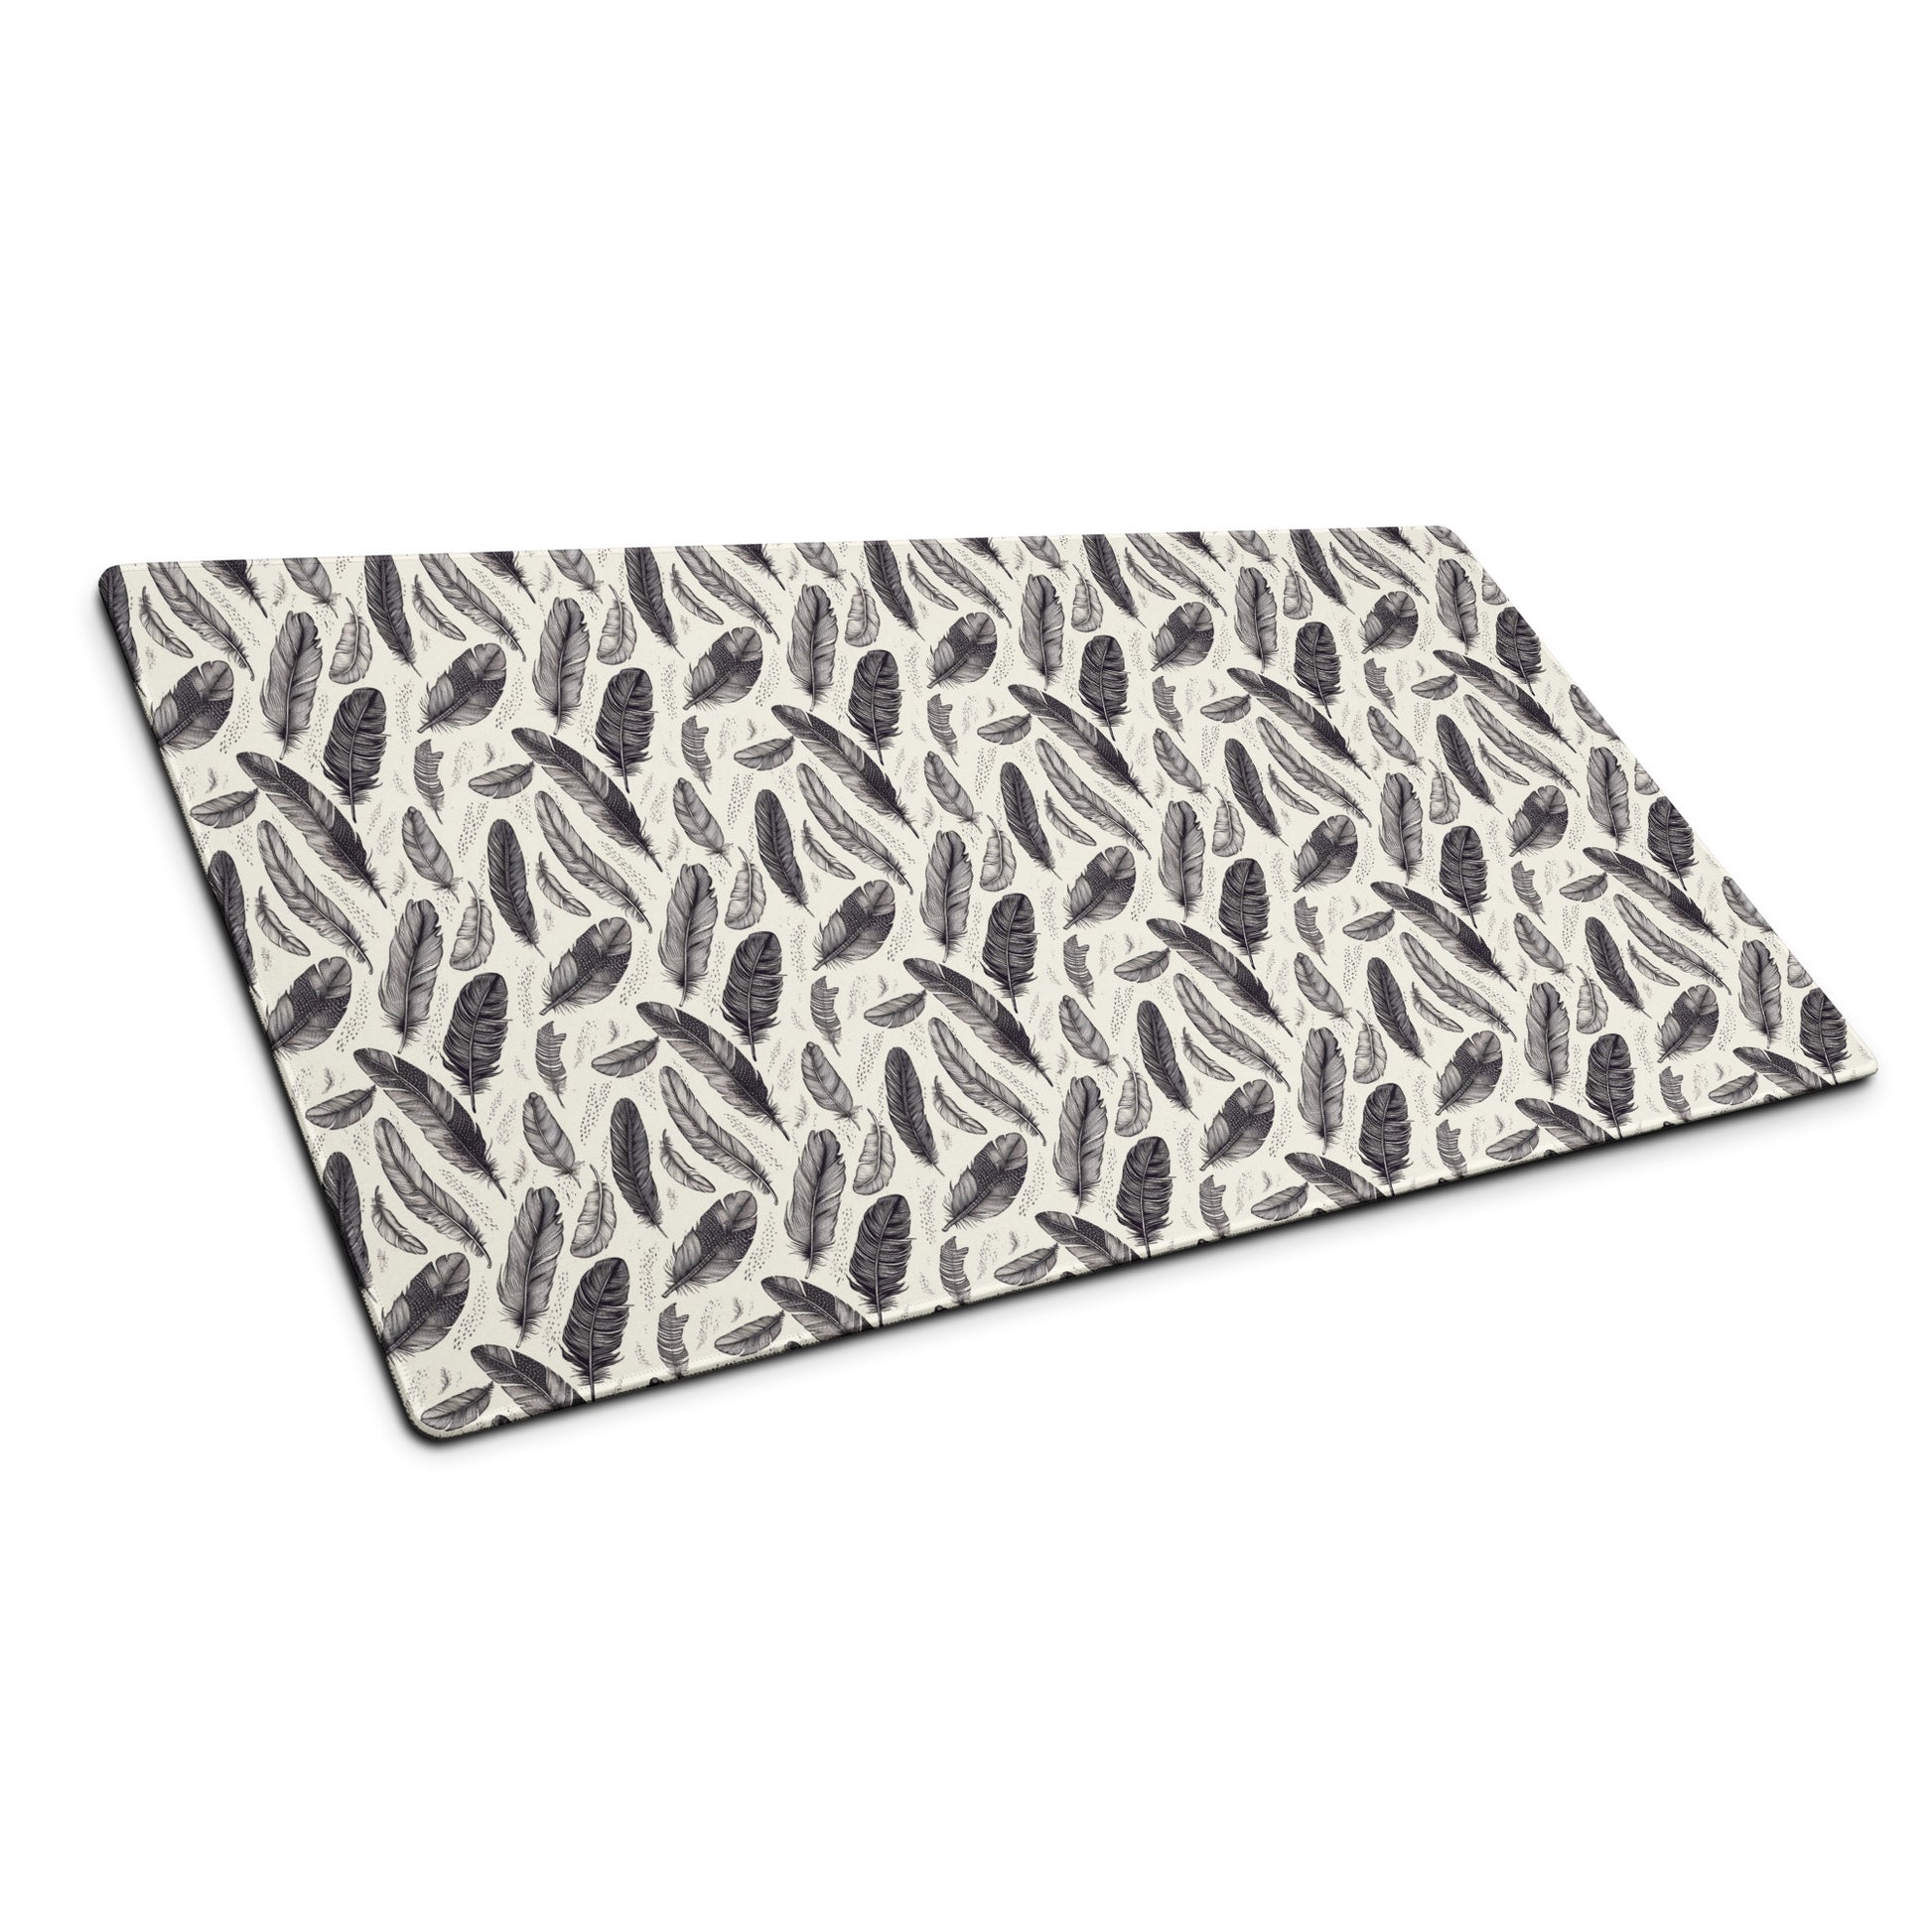 A 36" x 18" gaming desk pad with black and white feathers sitting at an angle.